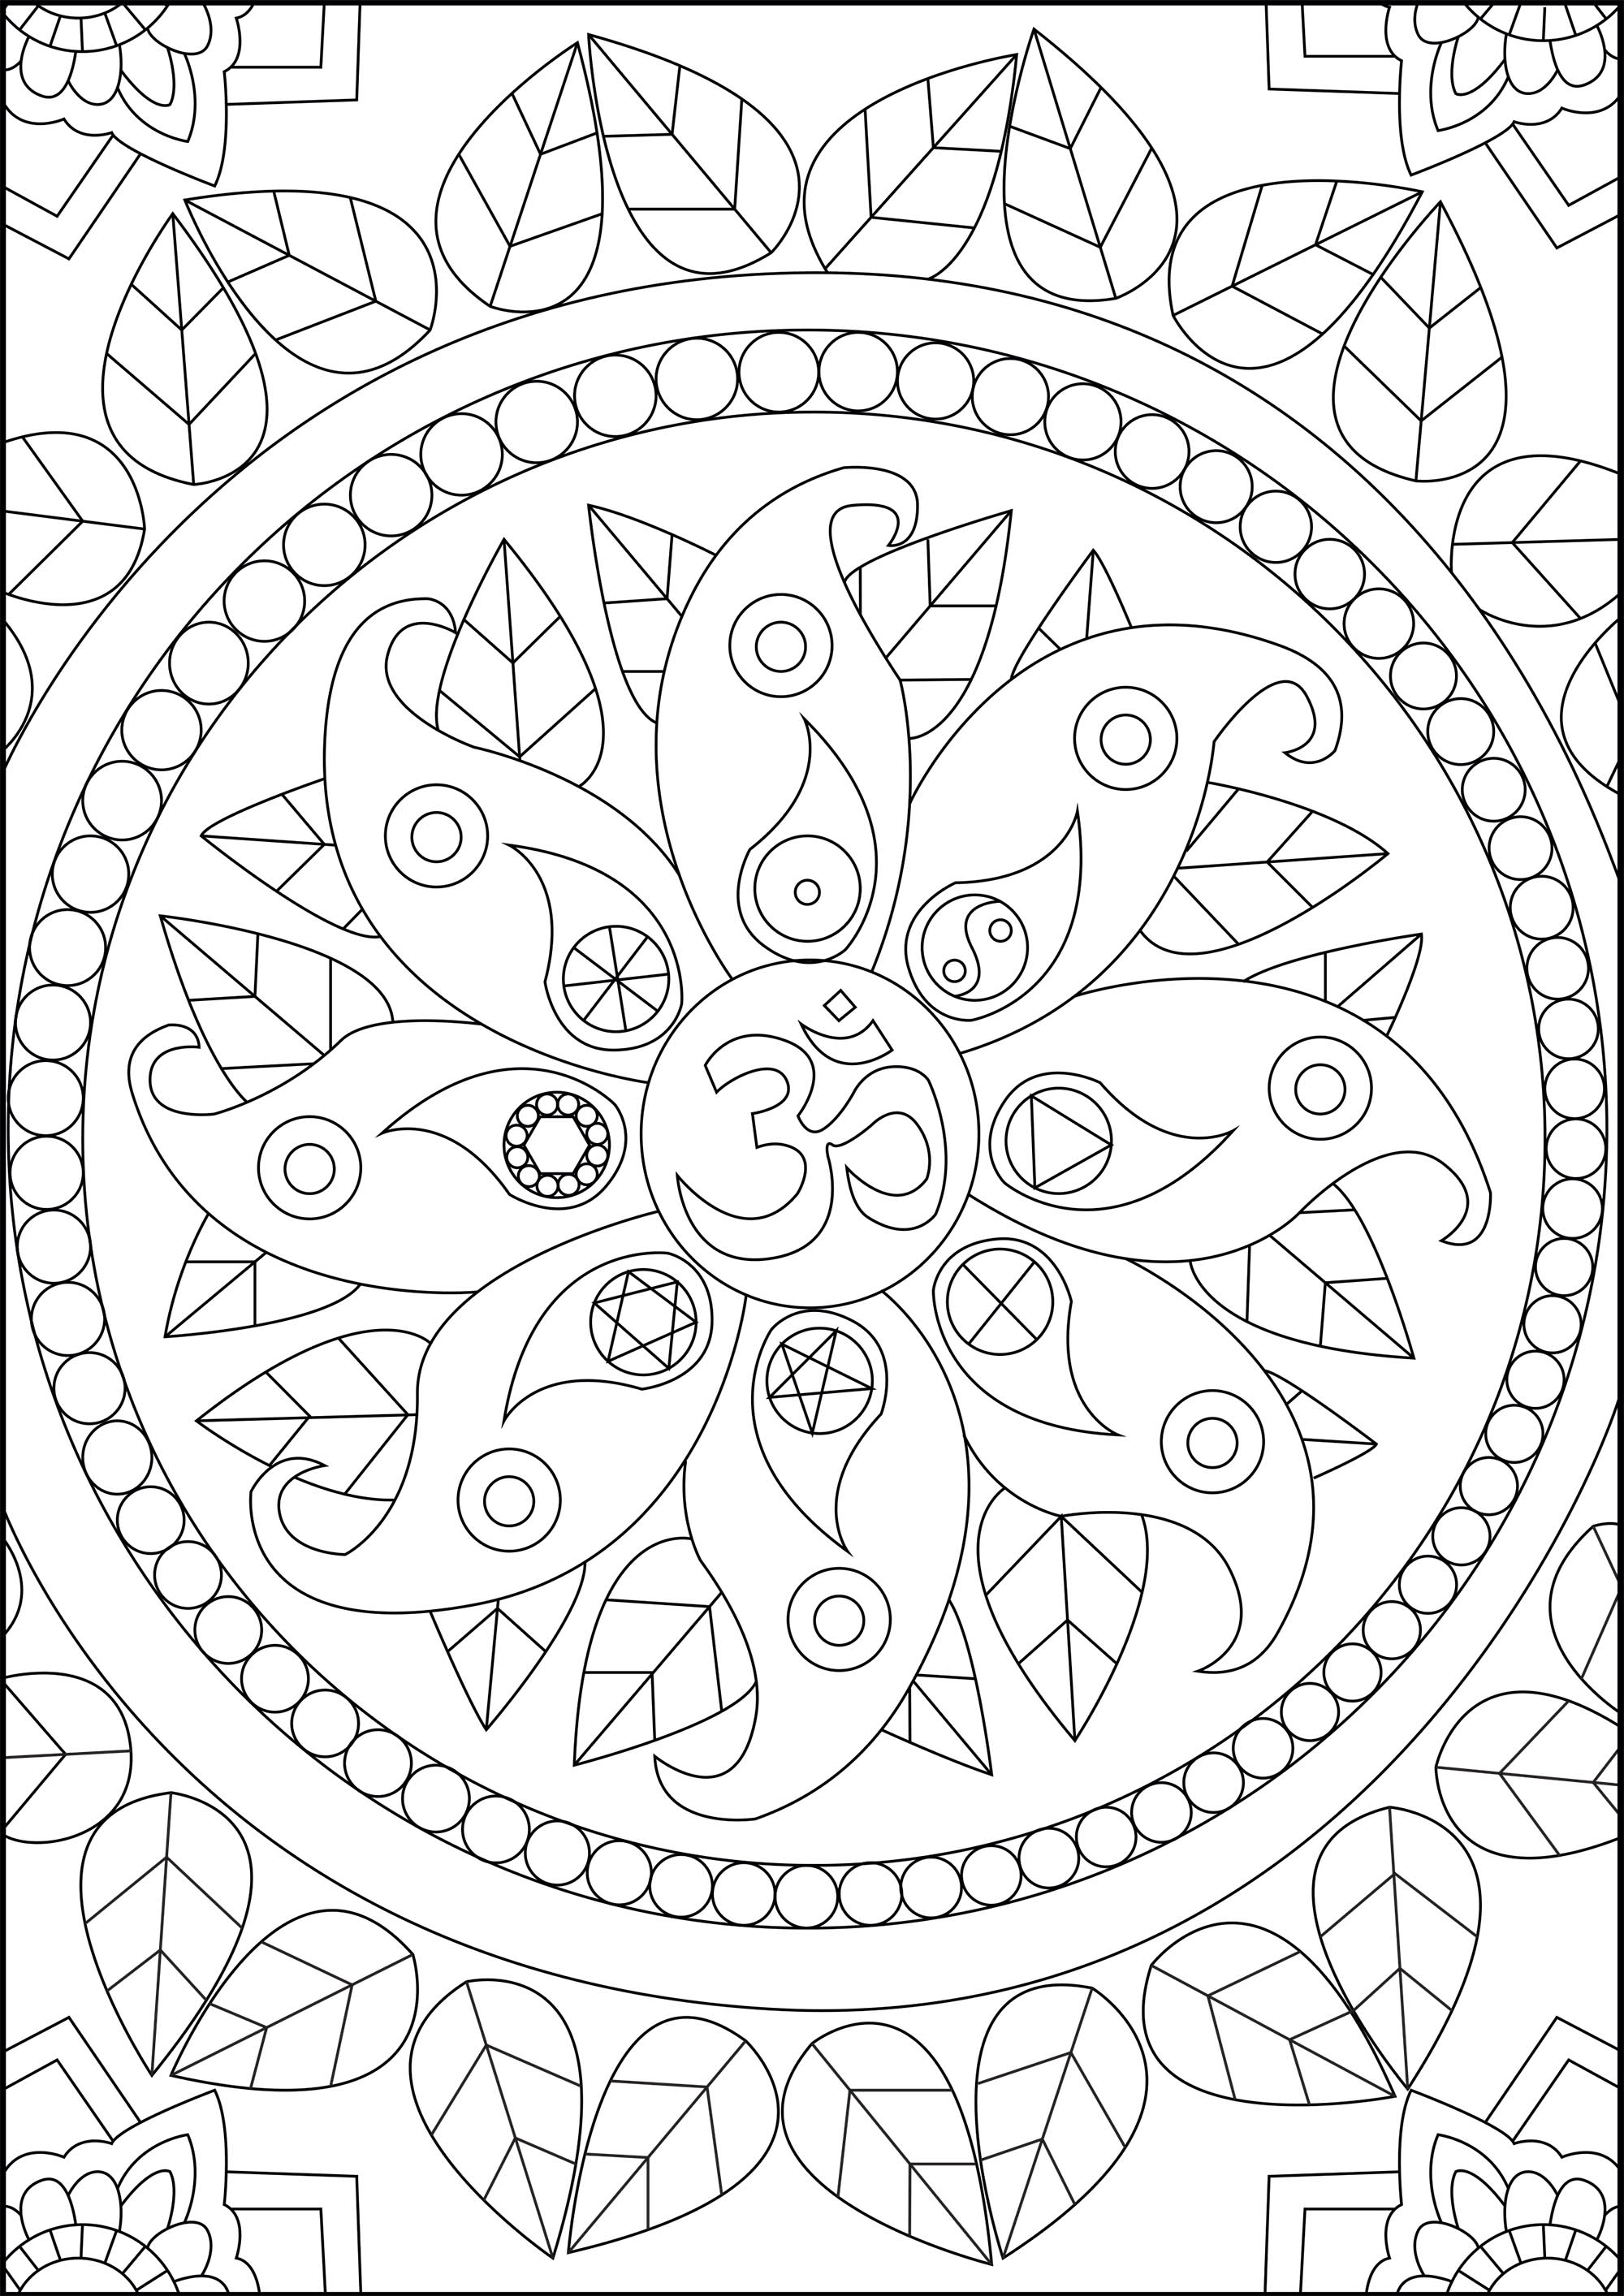 Download Zen - Free Coloring Pages